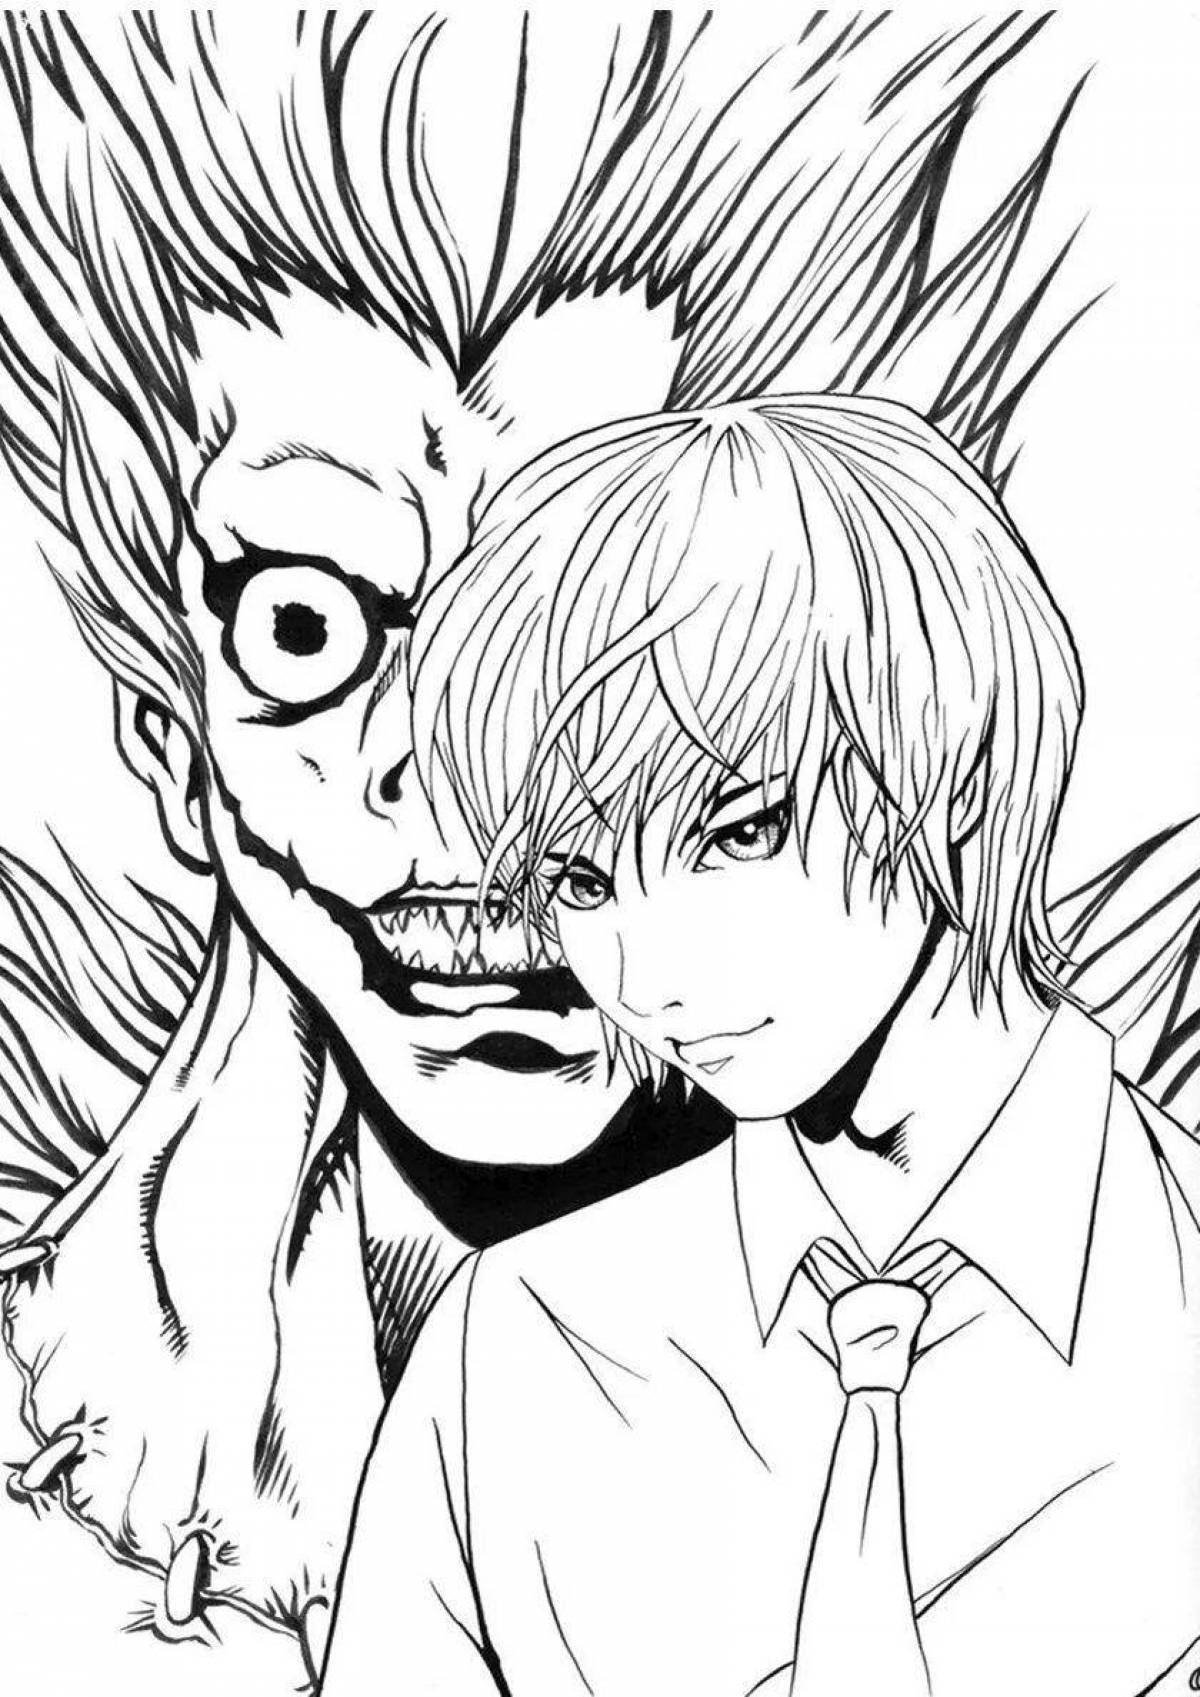 Death note anime adorable coloring book